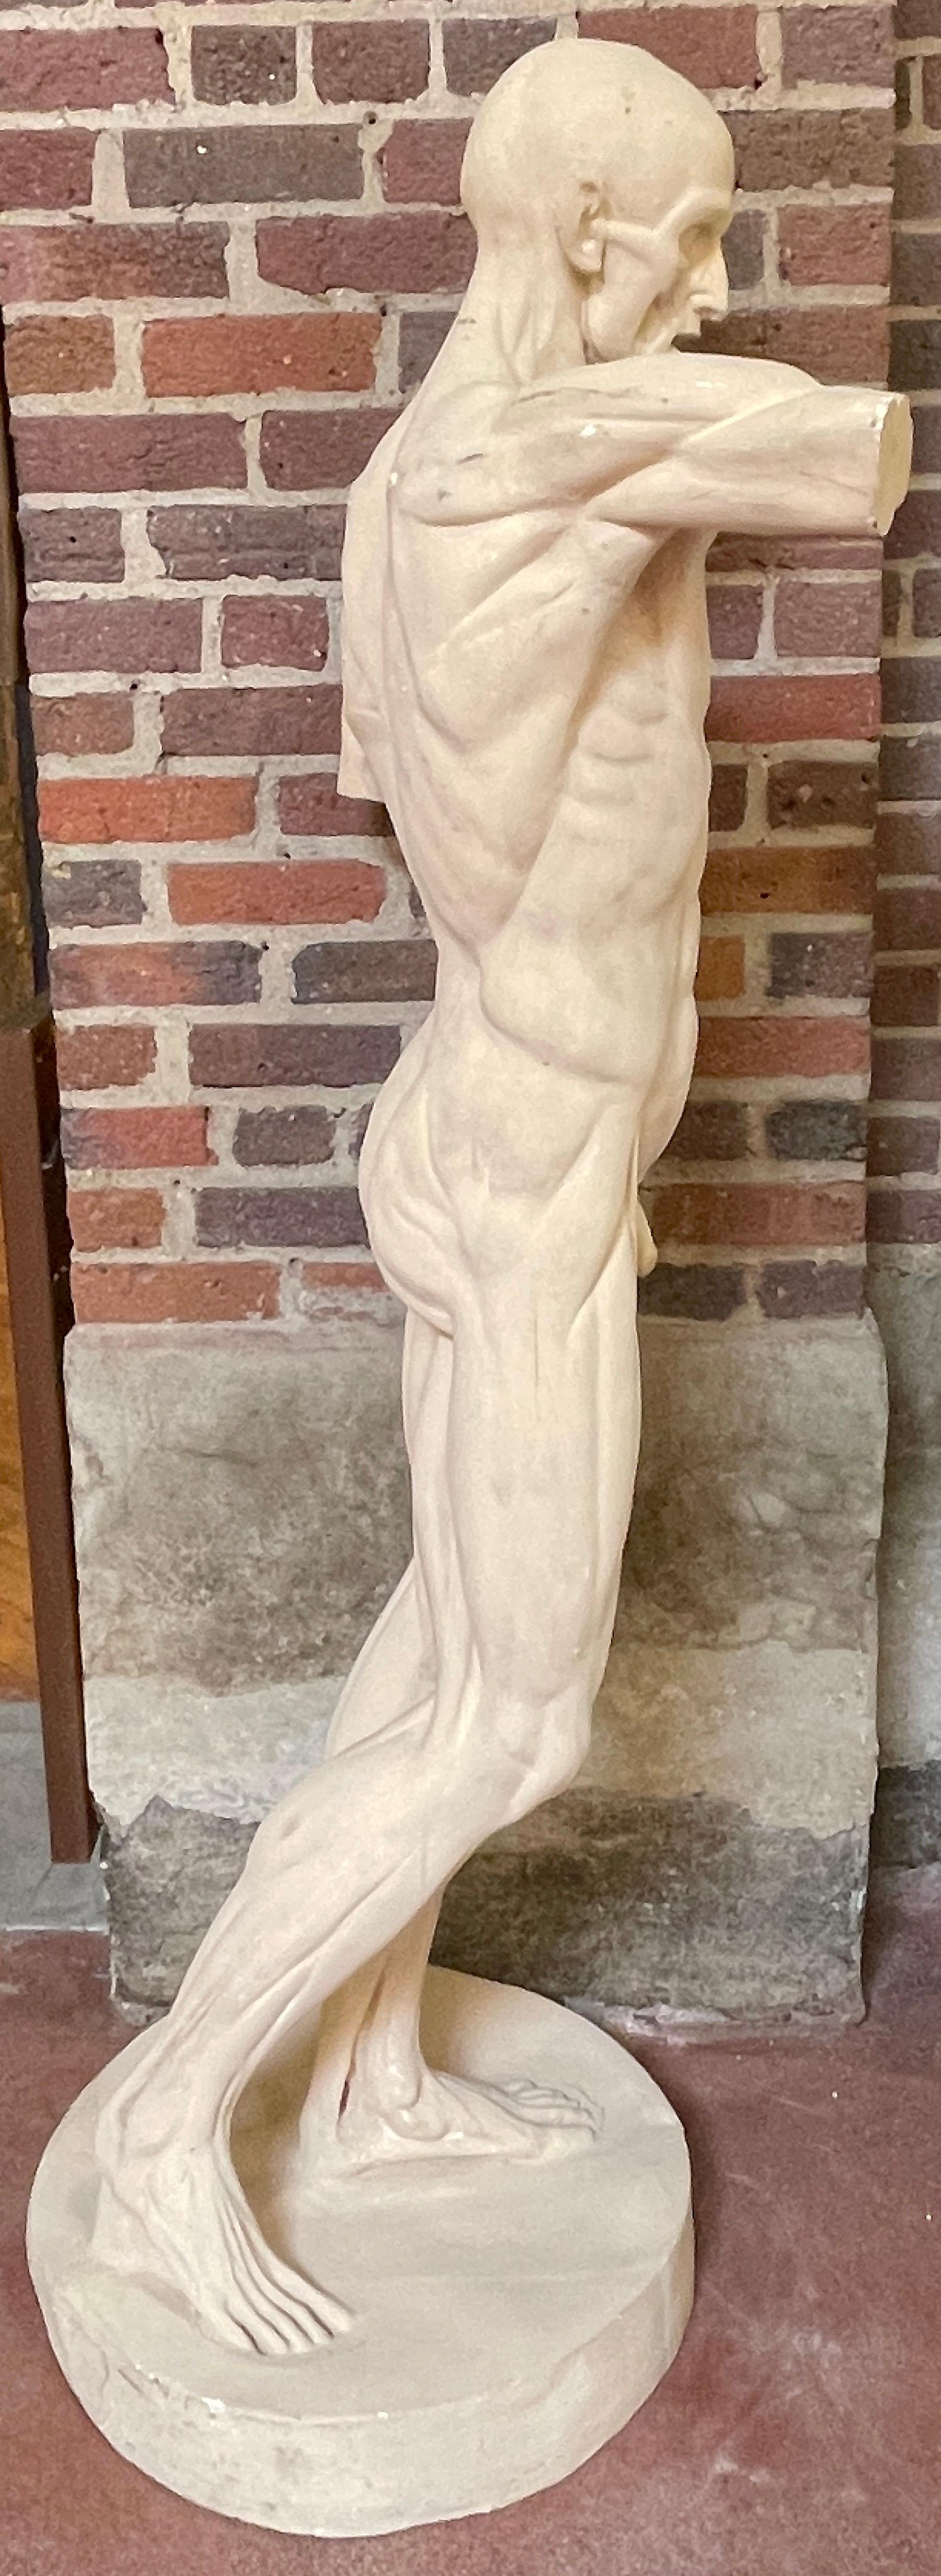 Polychromed Life Size Anatomical Study of Flayed Male L'ecorche after Jean-Antoine Houdon